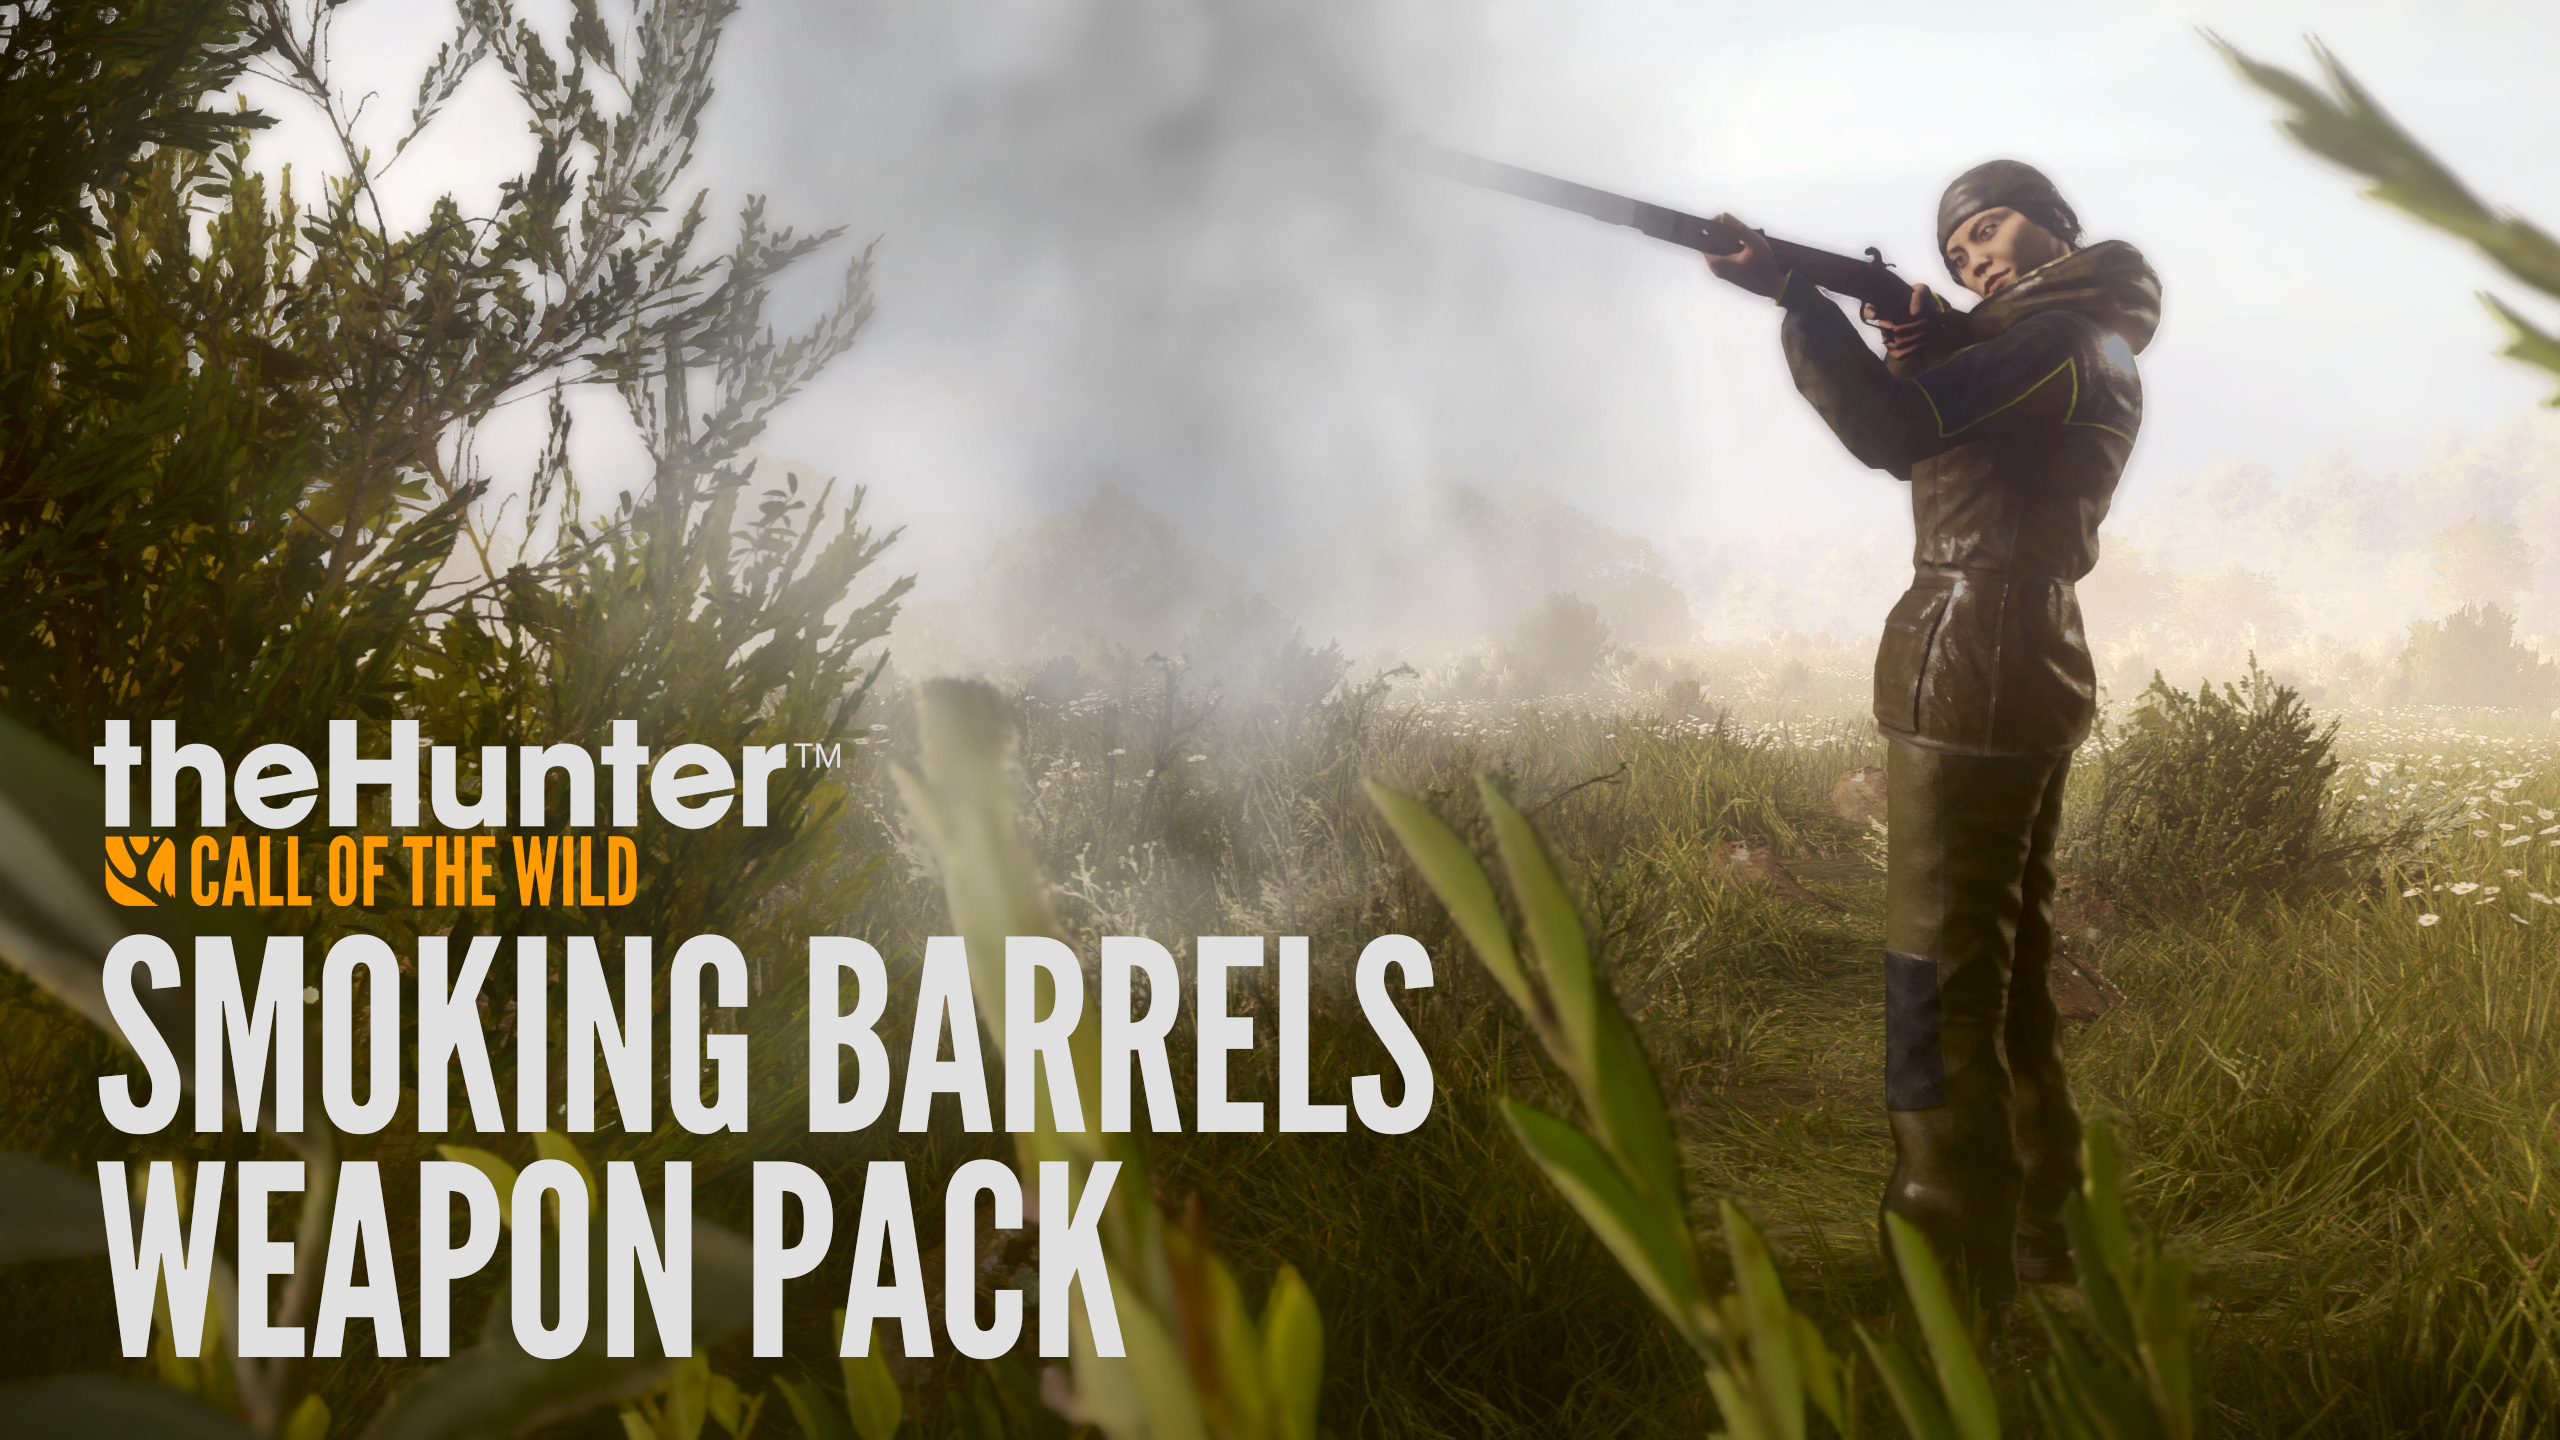 Call of the wild epic games. THEHUNTER: Call of the Wild - smoking Barrels Weapon Pack. The Hunter Call of the Wild ЭПИК геймс. THEHUNTER Call of the Wild Weapon Pack 3. The Hunter Call of the Wild оружие.